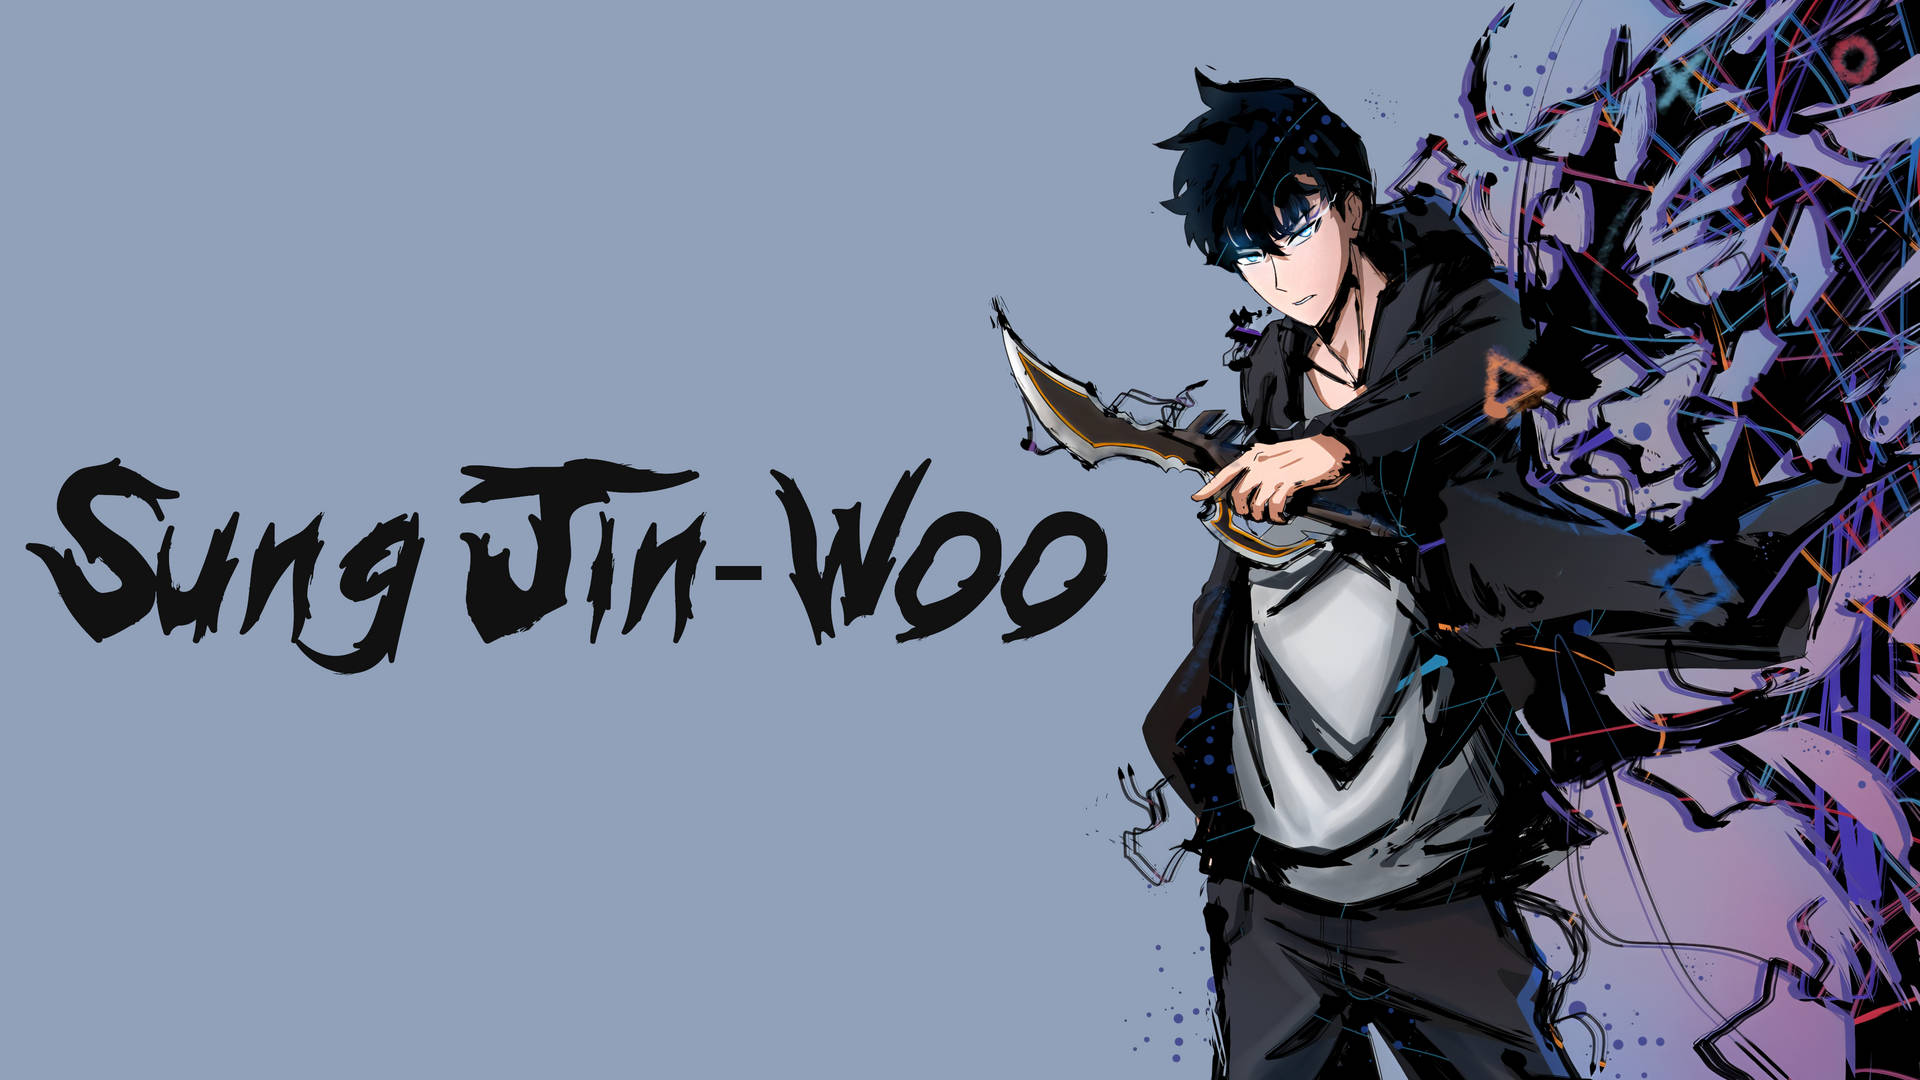 Jin-woo Name Solo Leveling 4k Background